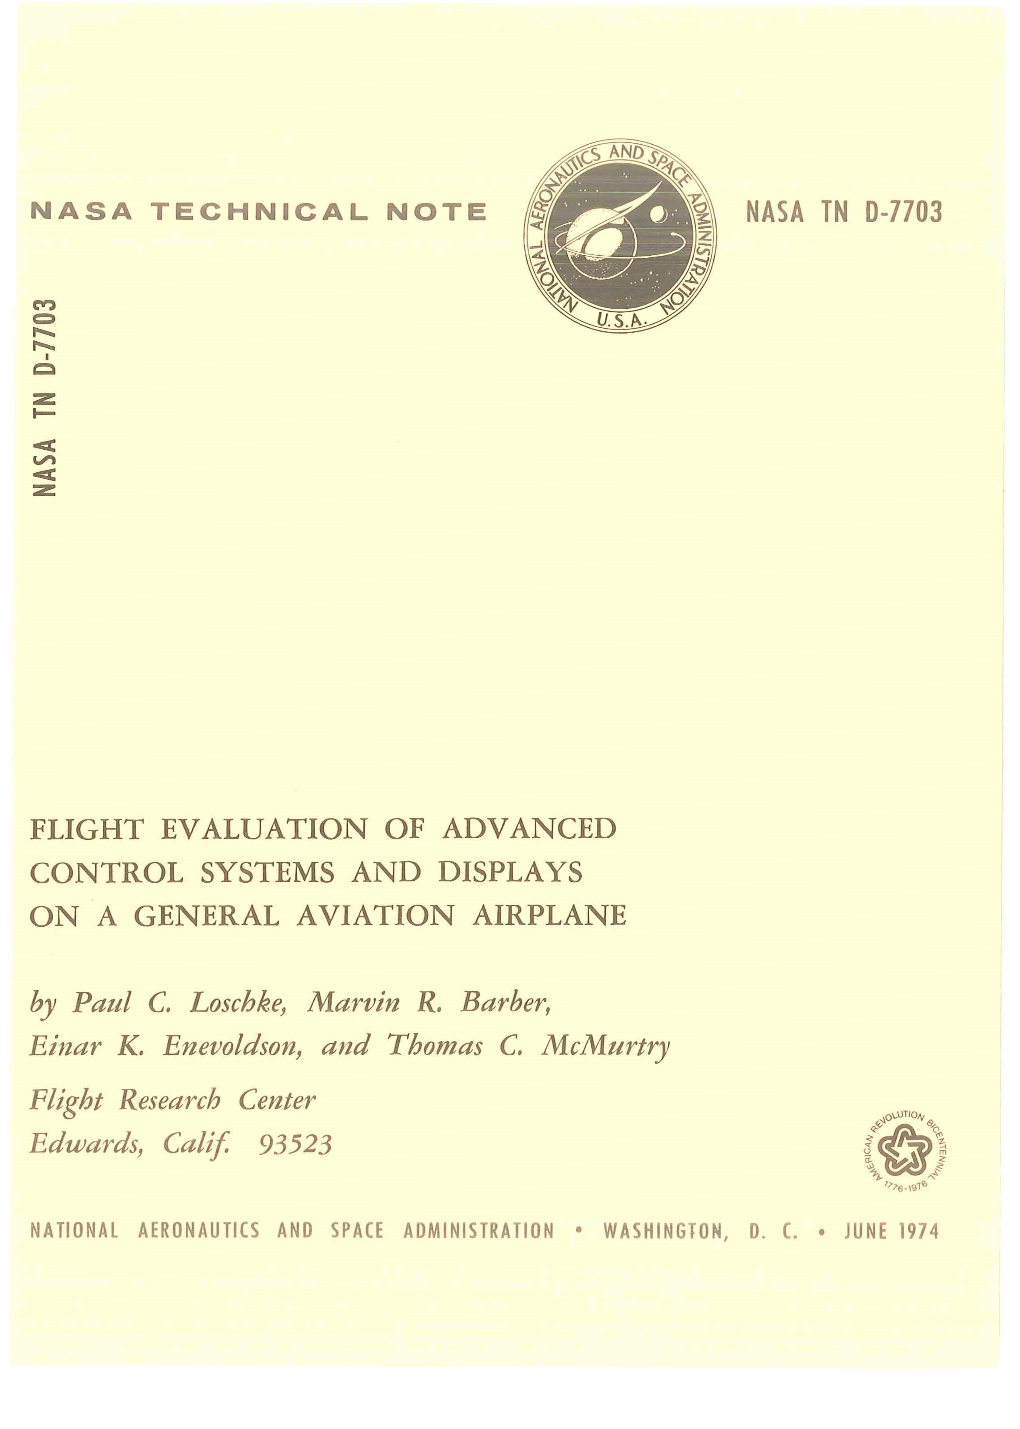 FLIGHT EVALUATION of ADVANCED CONTROL SYSTEMS and DISPLAYS on a GENERAL AVIATION AIRPLANE by Paul C